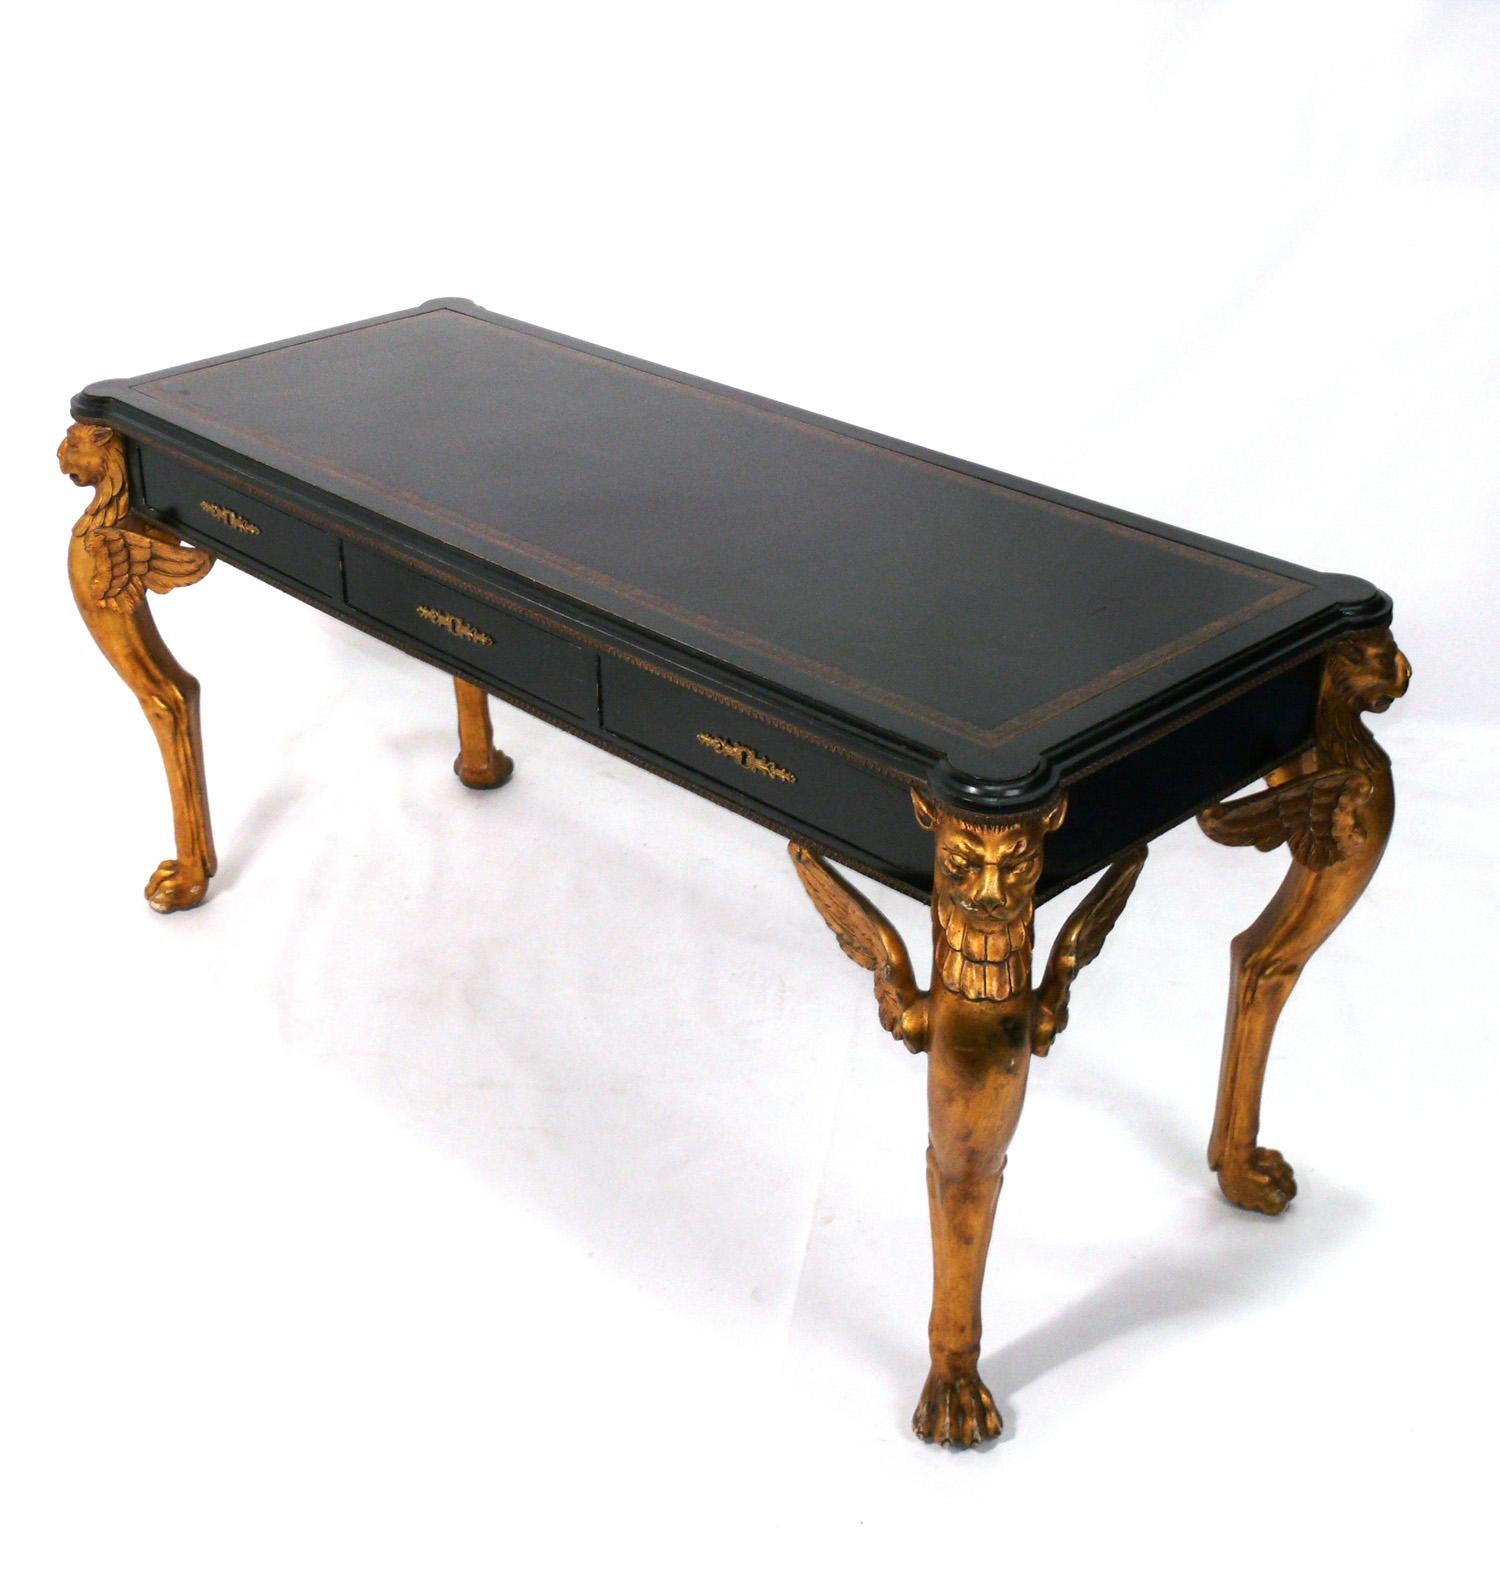 French Empire Style Bureau Plat or Desk, France, circa 1950s. Elegant design in black lacquered wood with brass hardware and an inset black leather top. It is finished on both sides, so it could be floated in a room, see last photo of the back side.